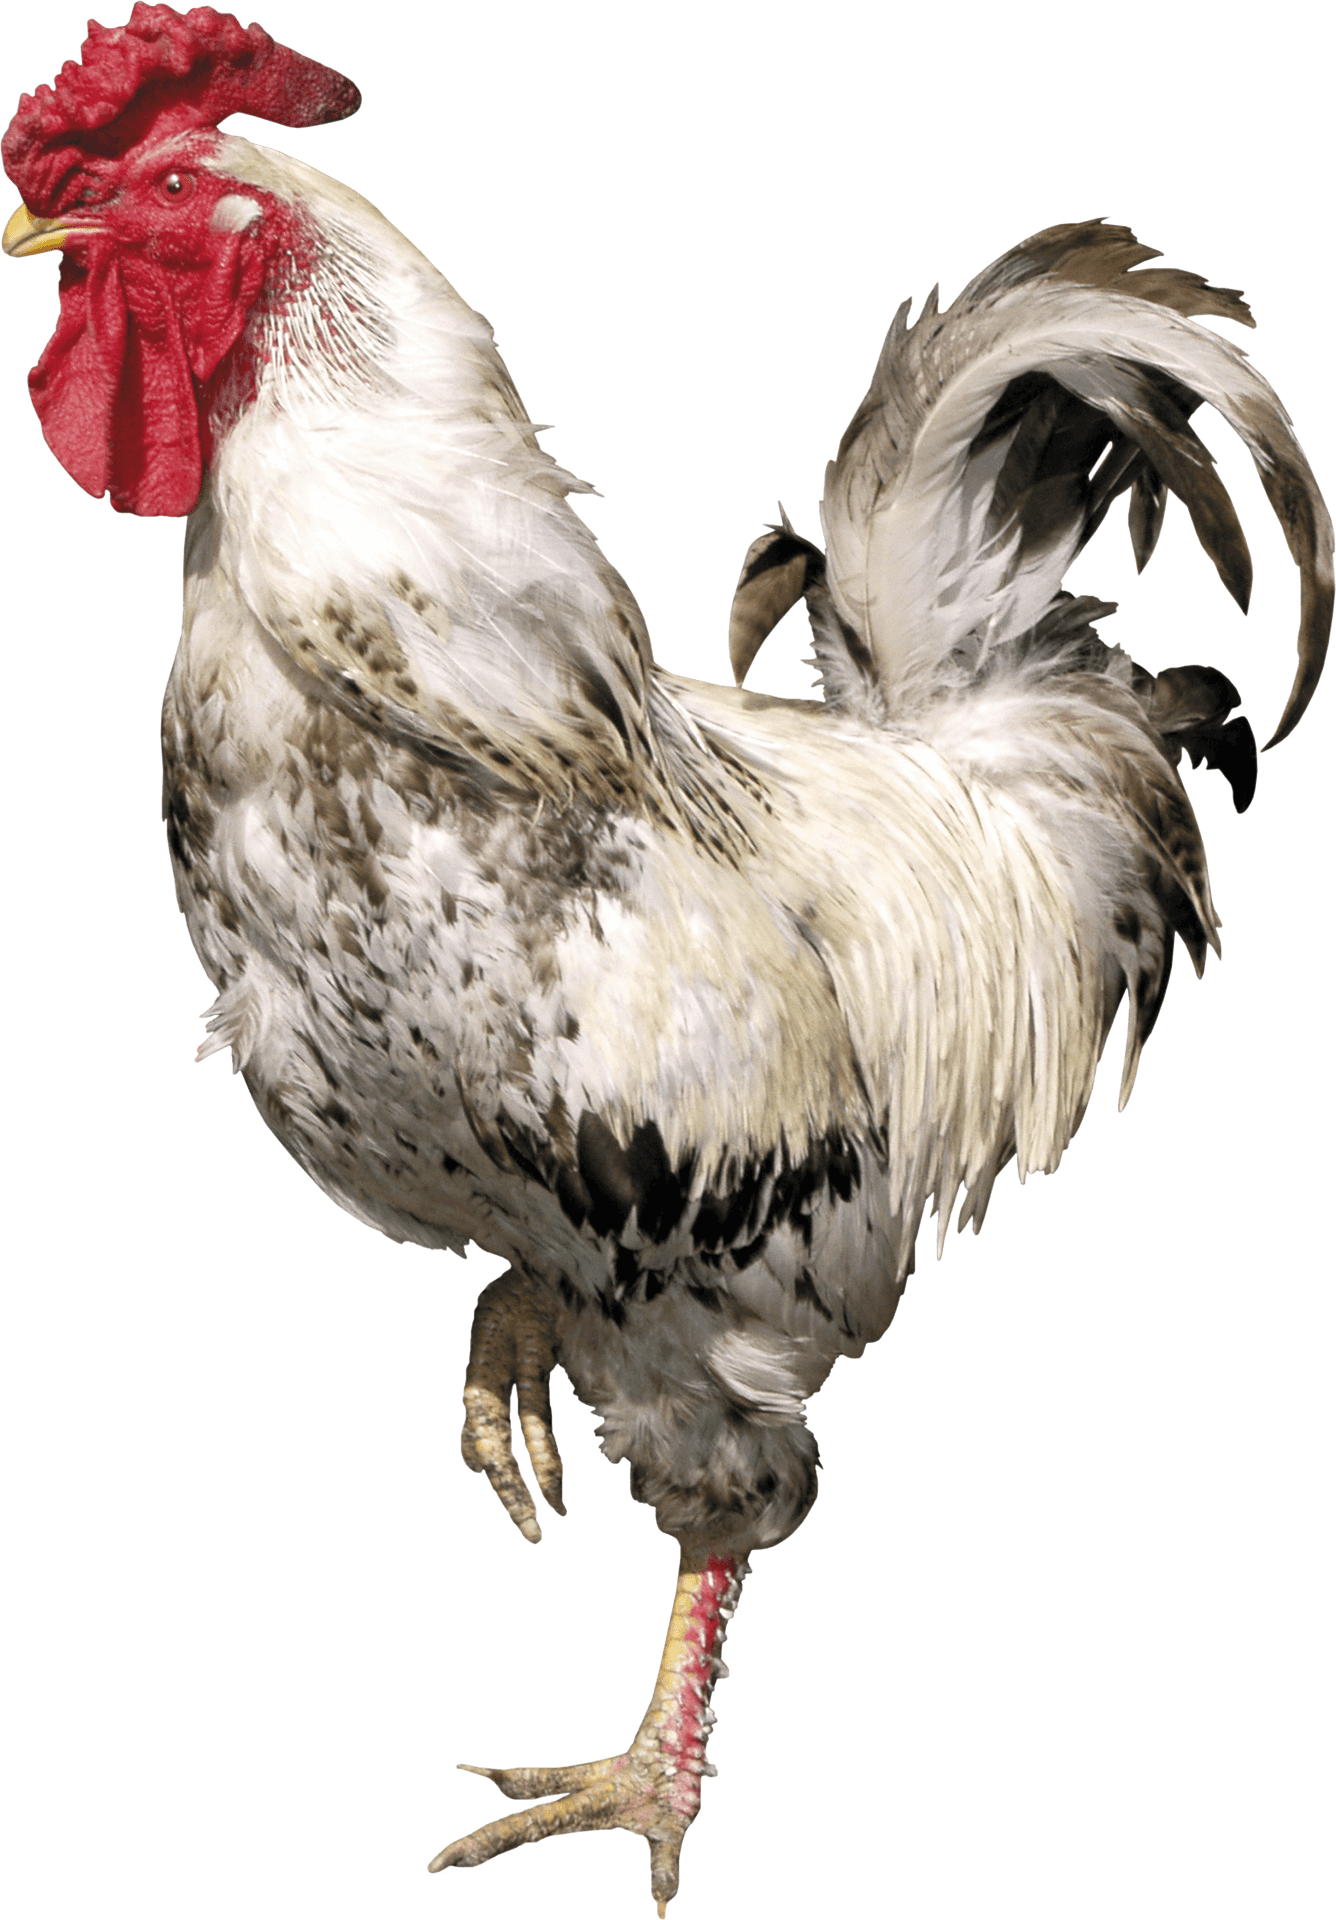 Majestic Rooster Profile PNG image